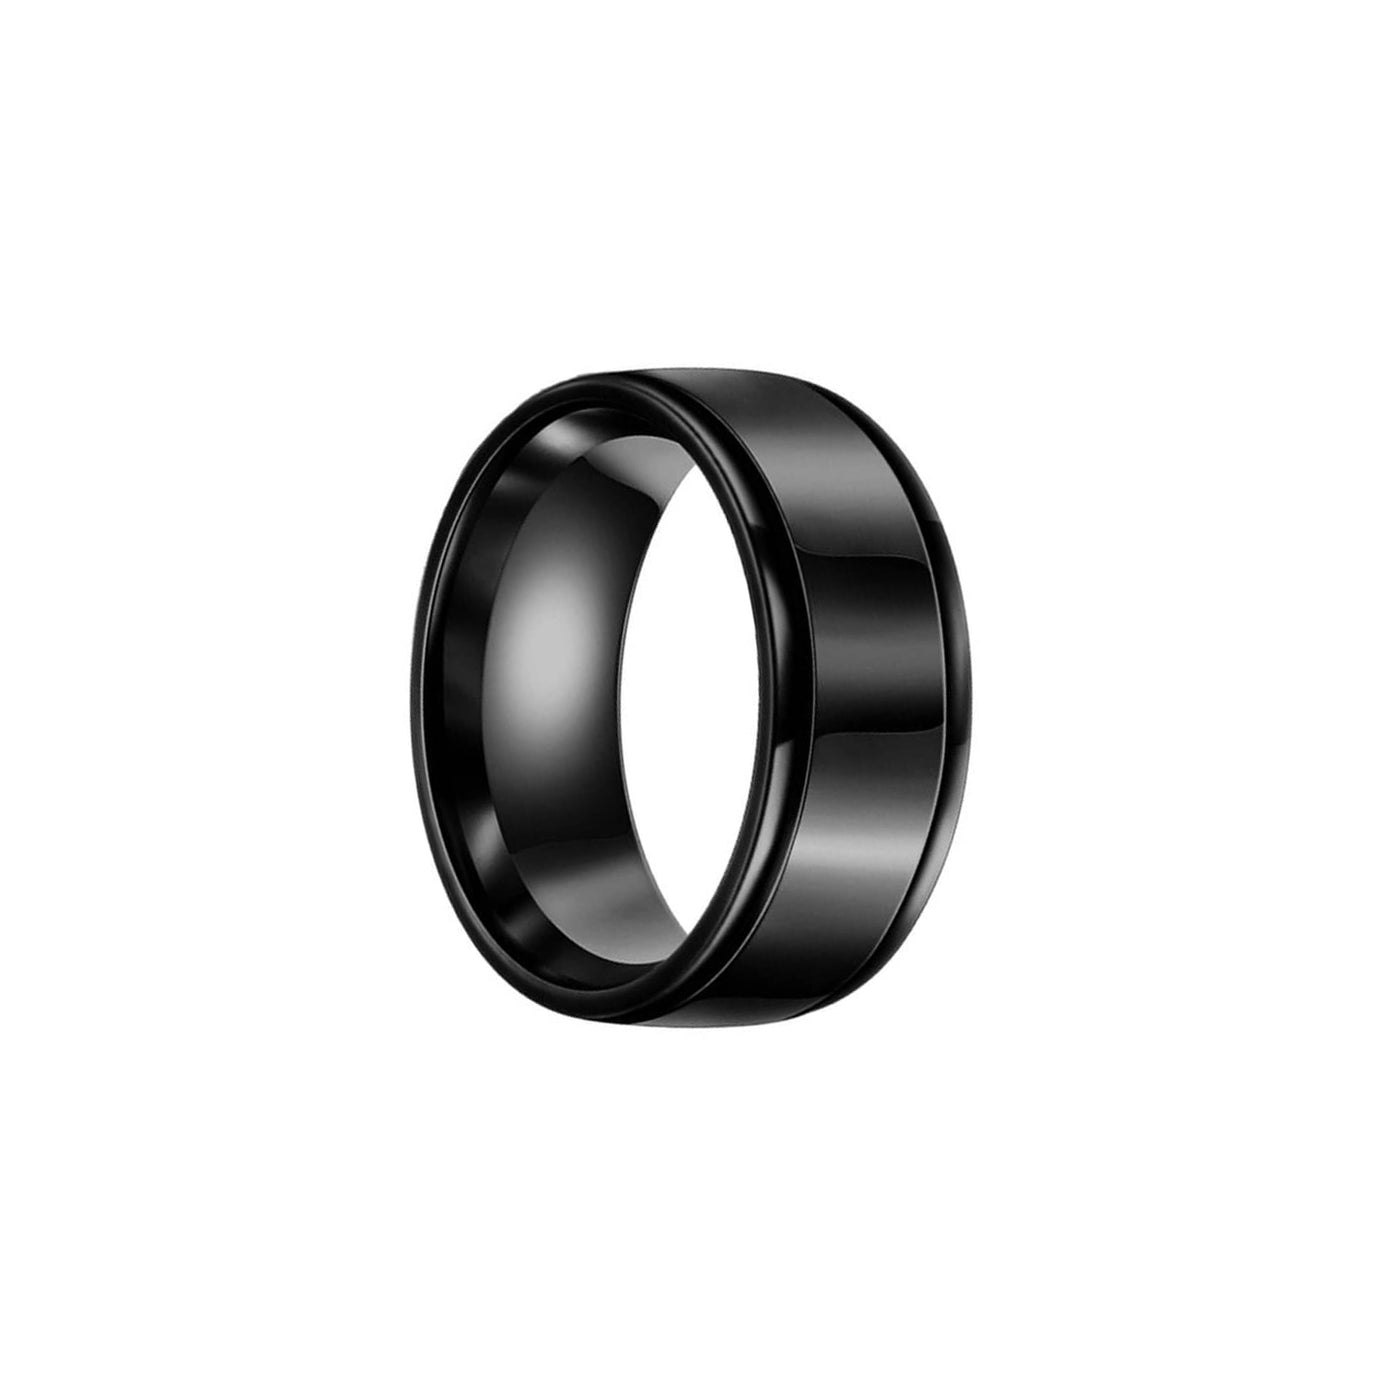 Black brushed steel ring with edges 8mm